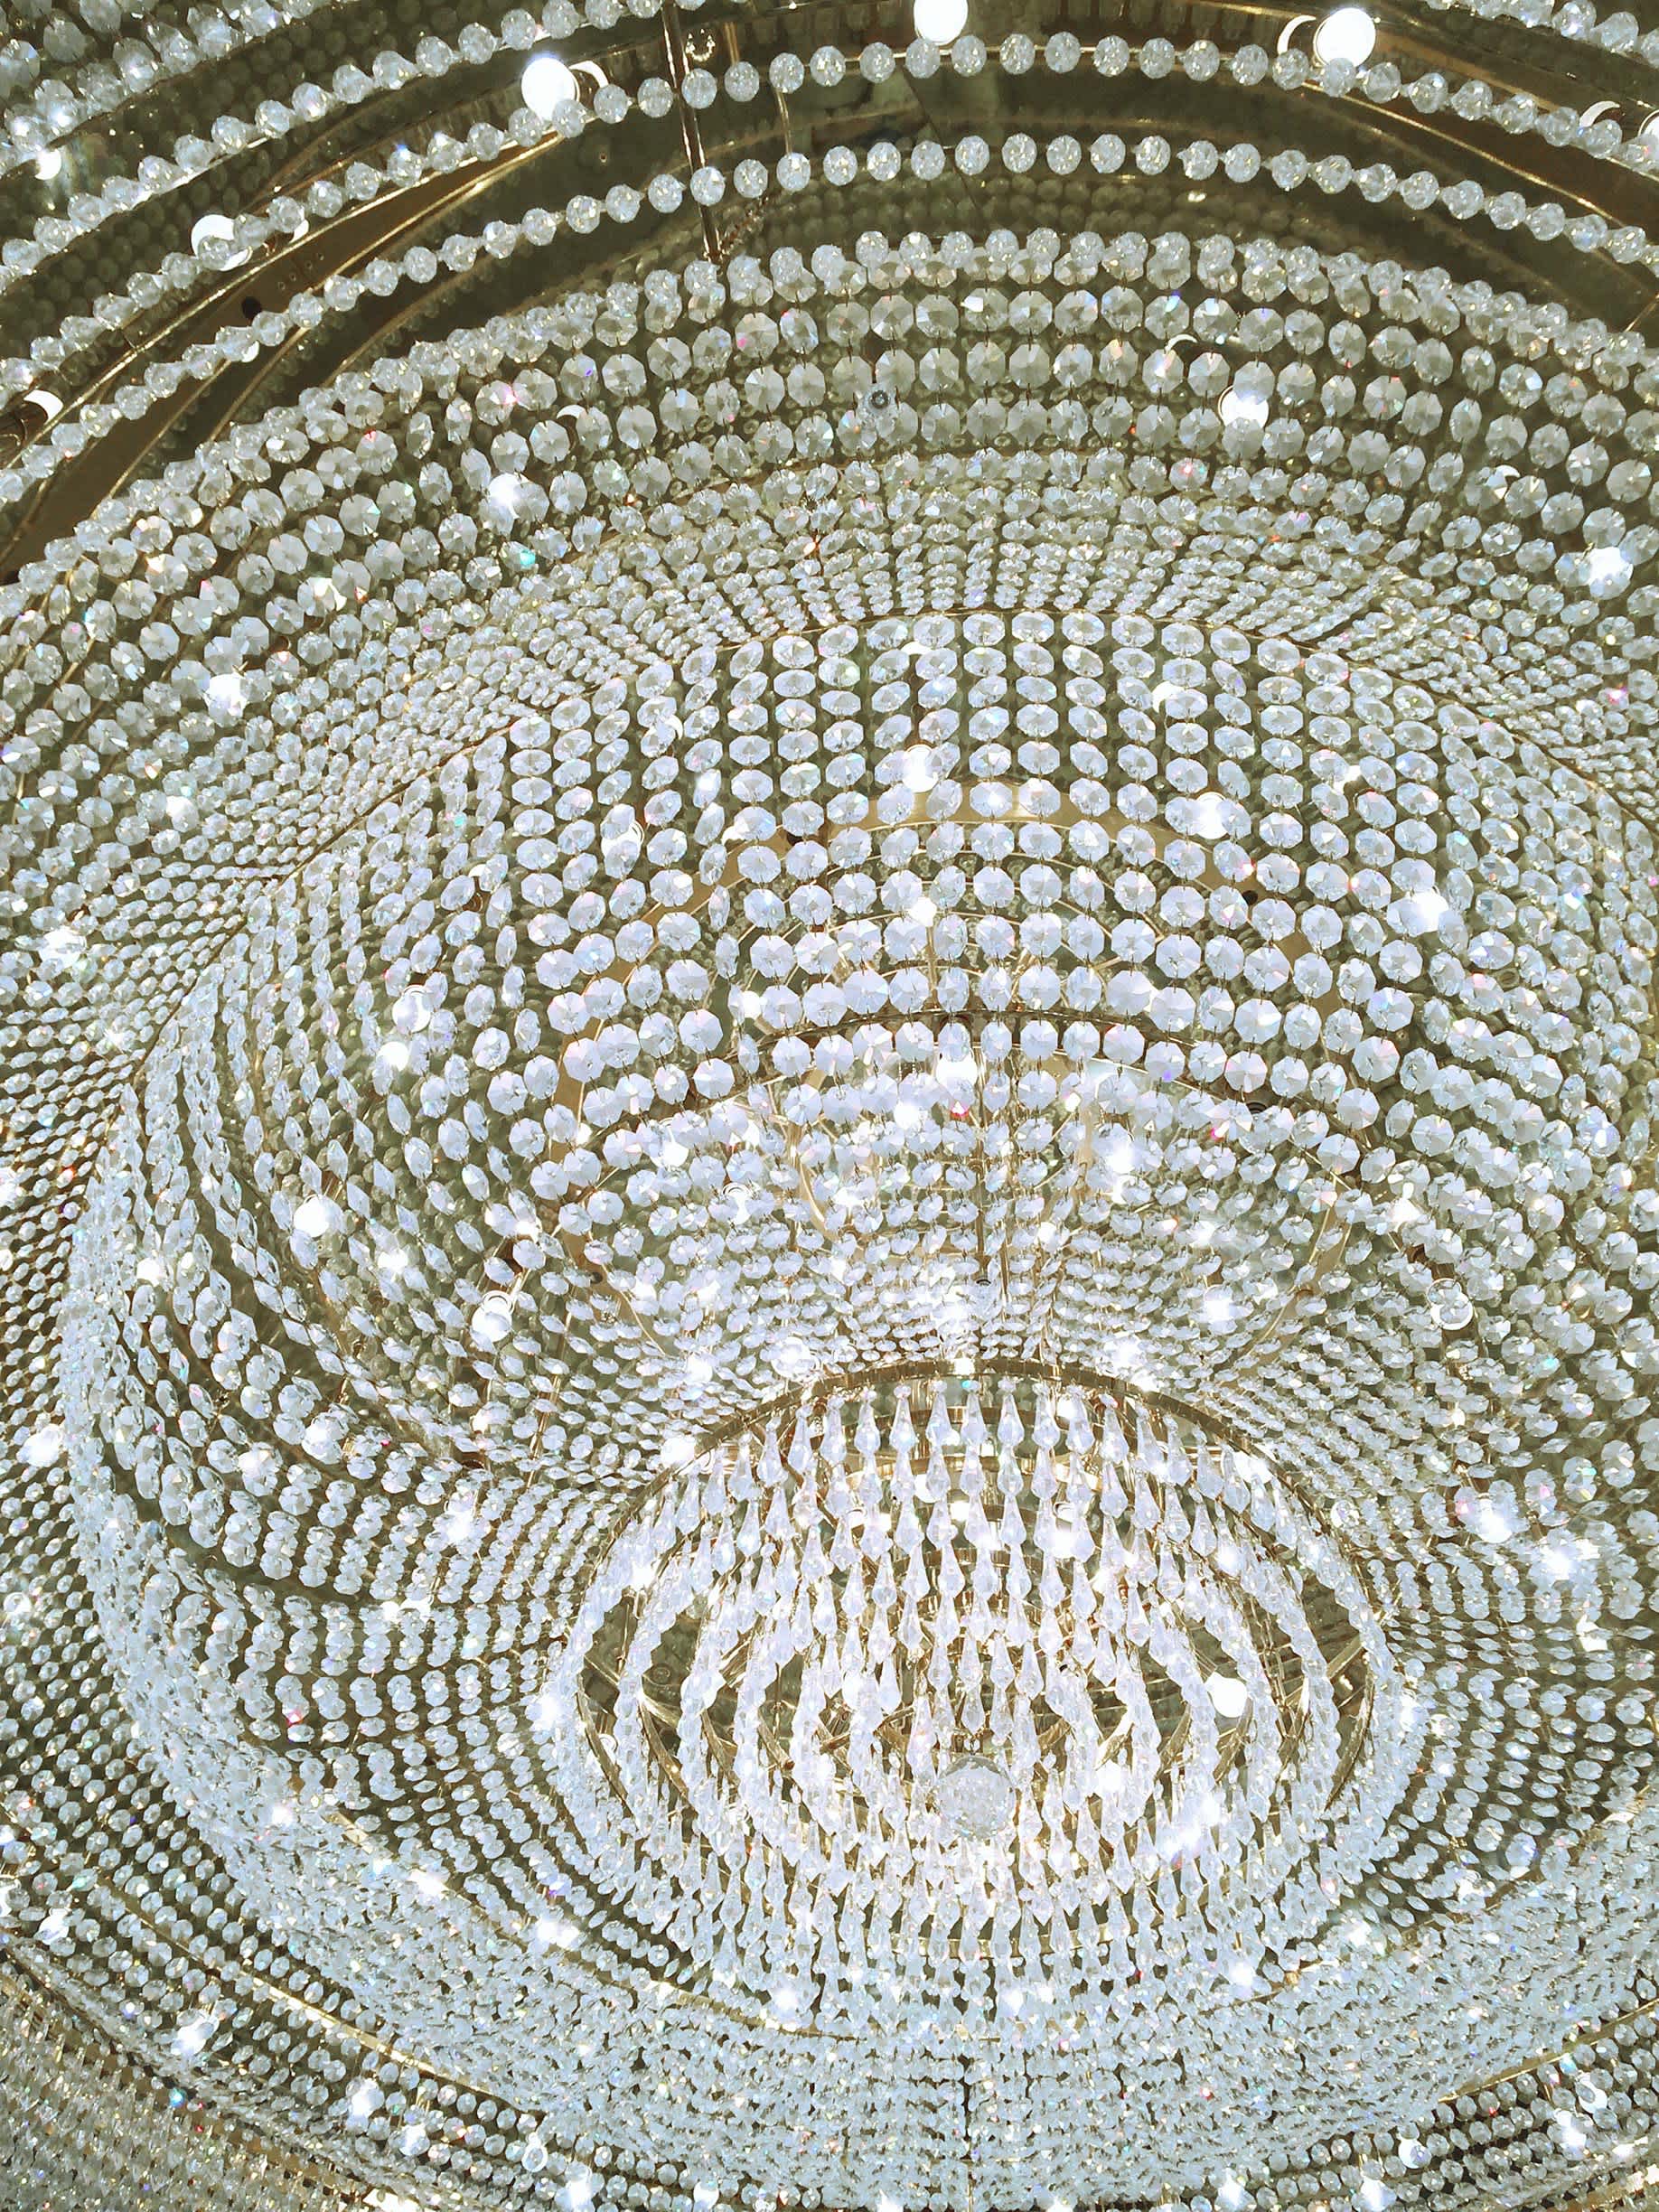 A close-up shot of a crystal chandelier from below.